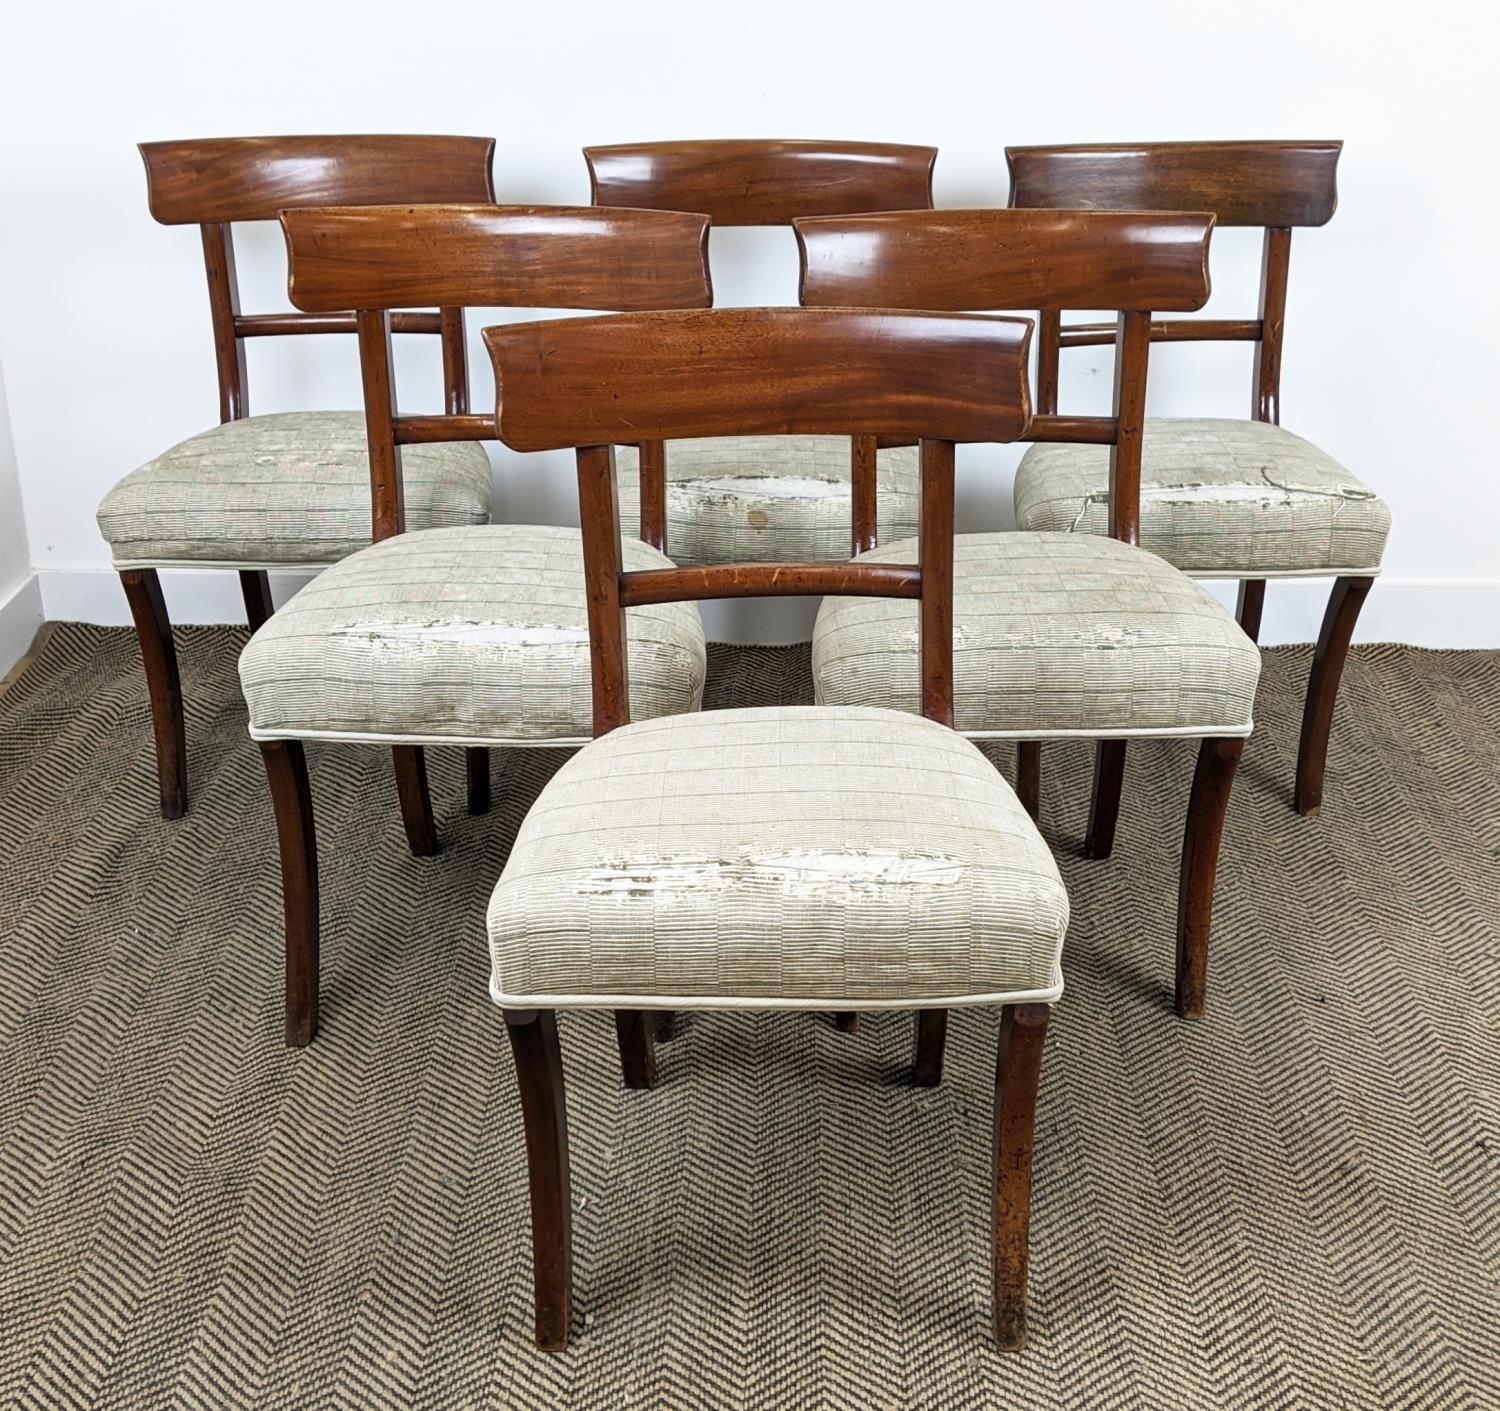 DINING CHAIRS, a set of six, circa 1830, mahogany with stuffover seats, 86cm H x 49cm x 48cm. (6) - Image 2 of 16